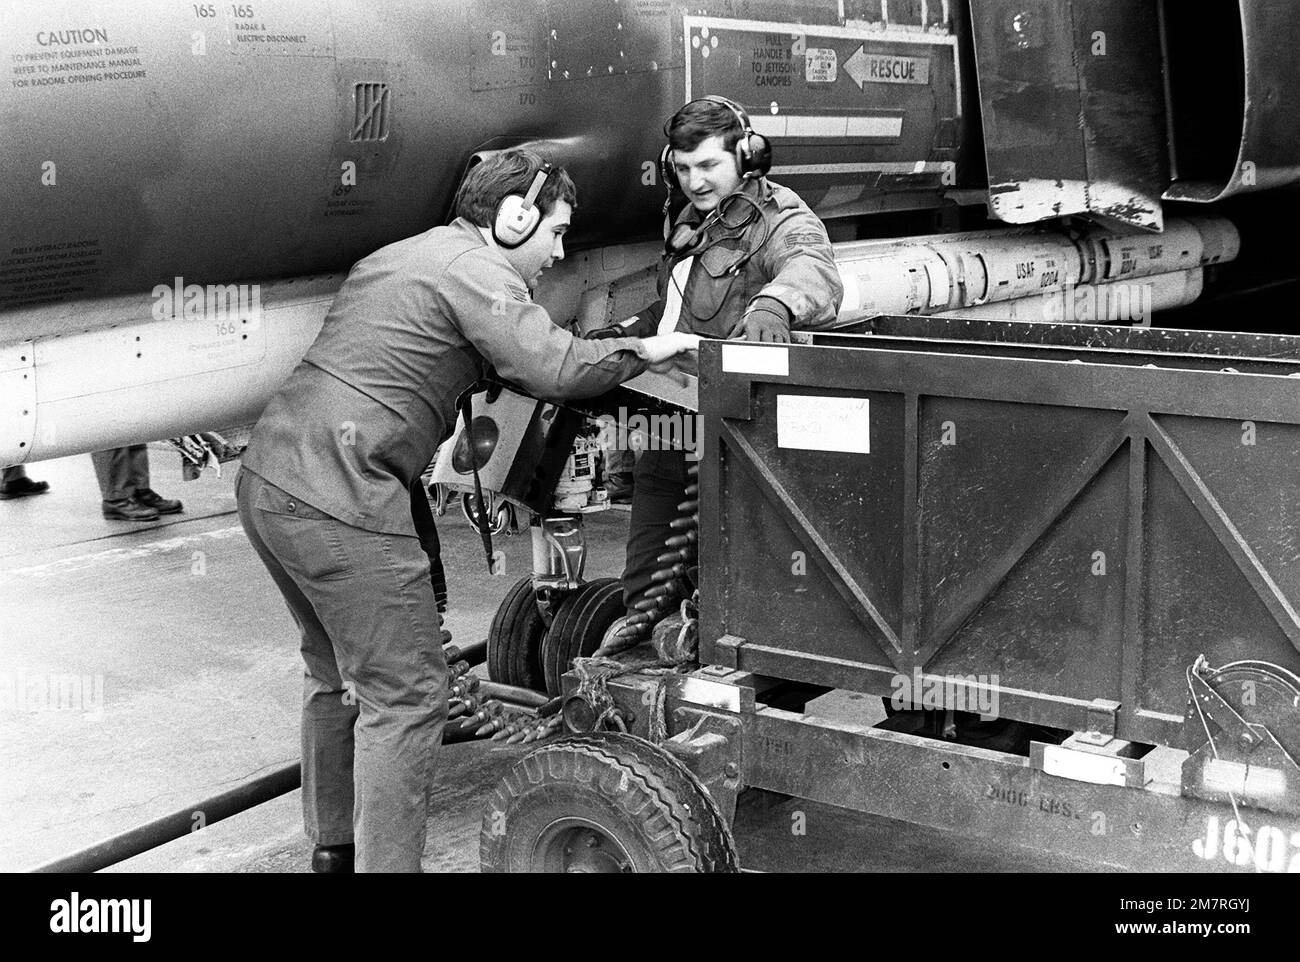 SGT Anderson and Loading Crew Supervisor, SSGT Ron Lowery, left to right, use a quick loader to load 20mm rounds into an F-4 Phantom II aircraft nose gun. Base: Spangdahlem Air Base State: Rheinland-Pfalz Country: Deutschland / Germany (DEU) Stock Photo